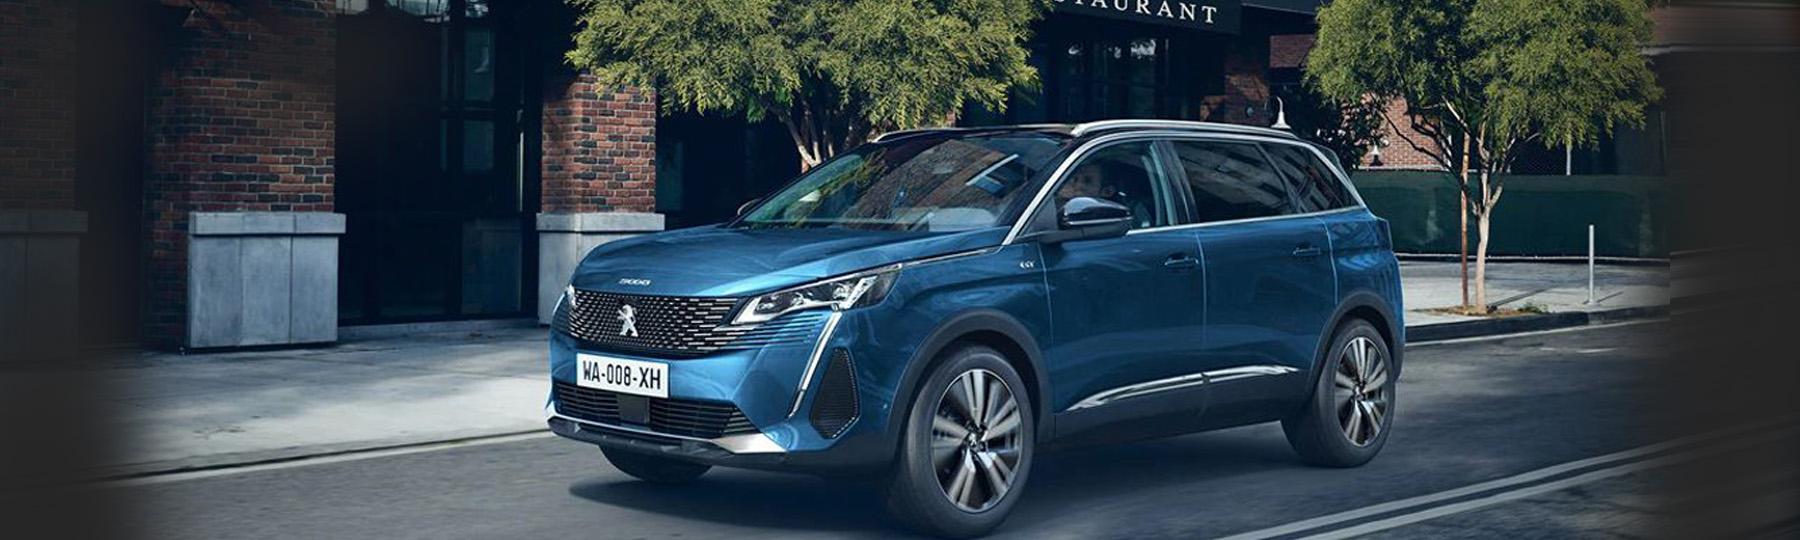 New 241 PEUGEOT 5008 SUV Best 7 Seater